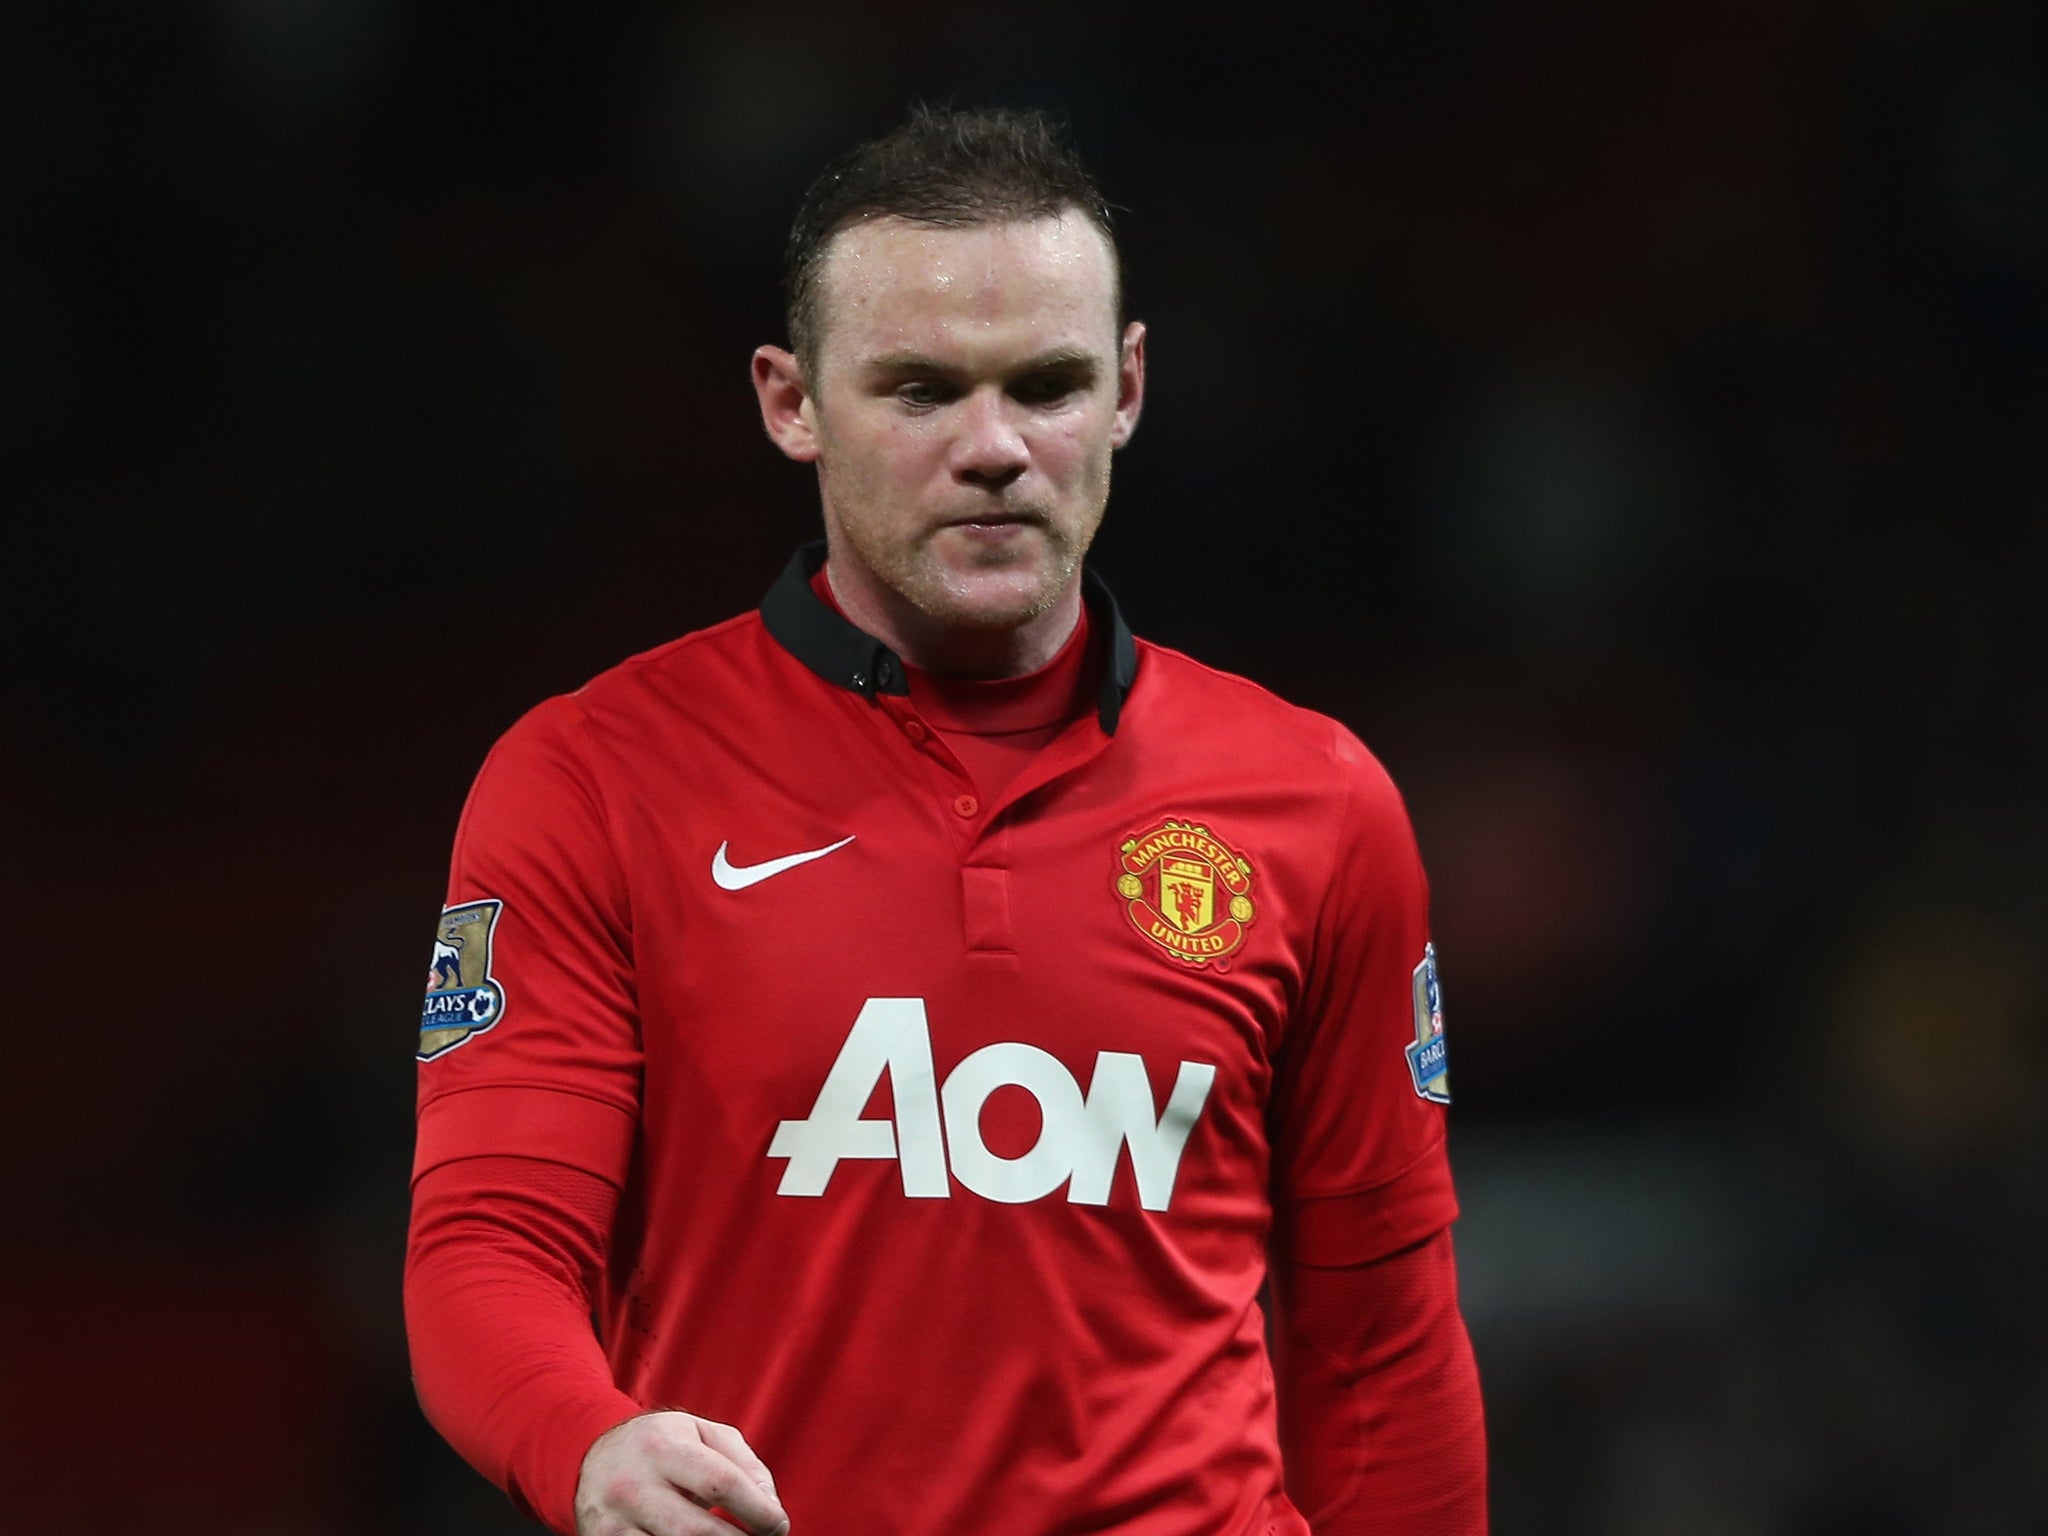 Manchester United manager David Moyes has confirmed that Wayne Rooney will miss the FA Cup tie with Swansea